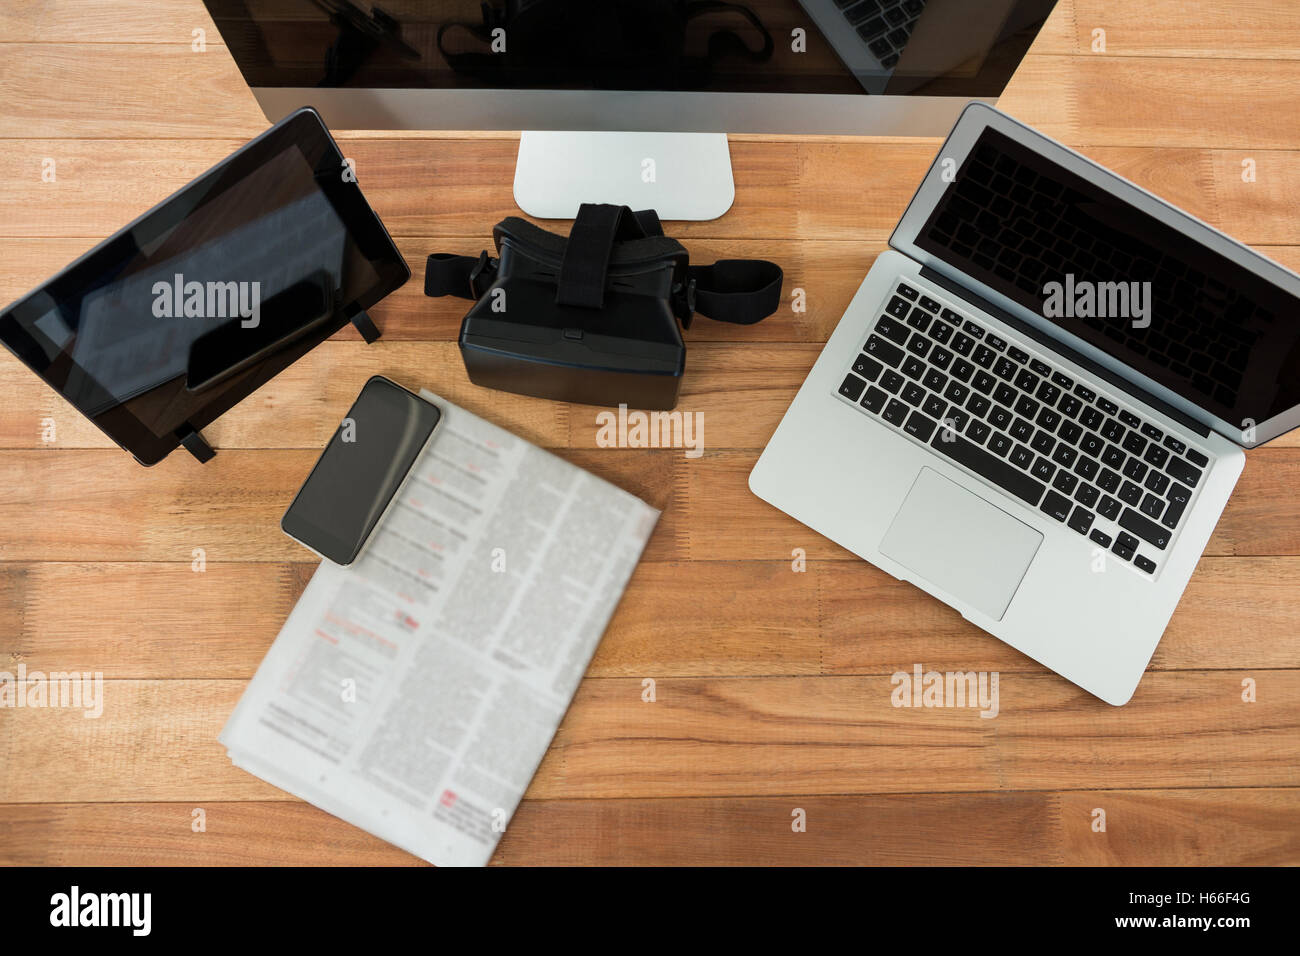 Computer, laptop, digital tablet, mobile phone, virtual headset and newspaper Stock Photo